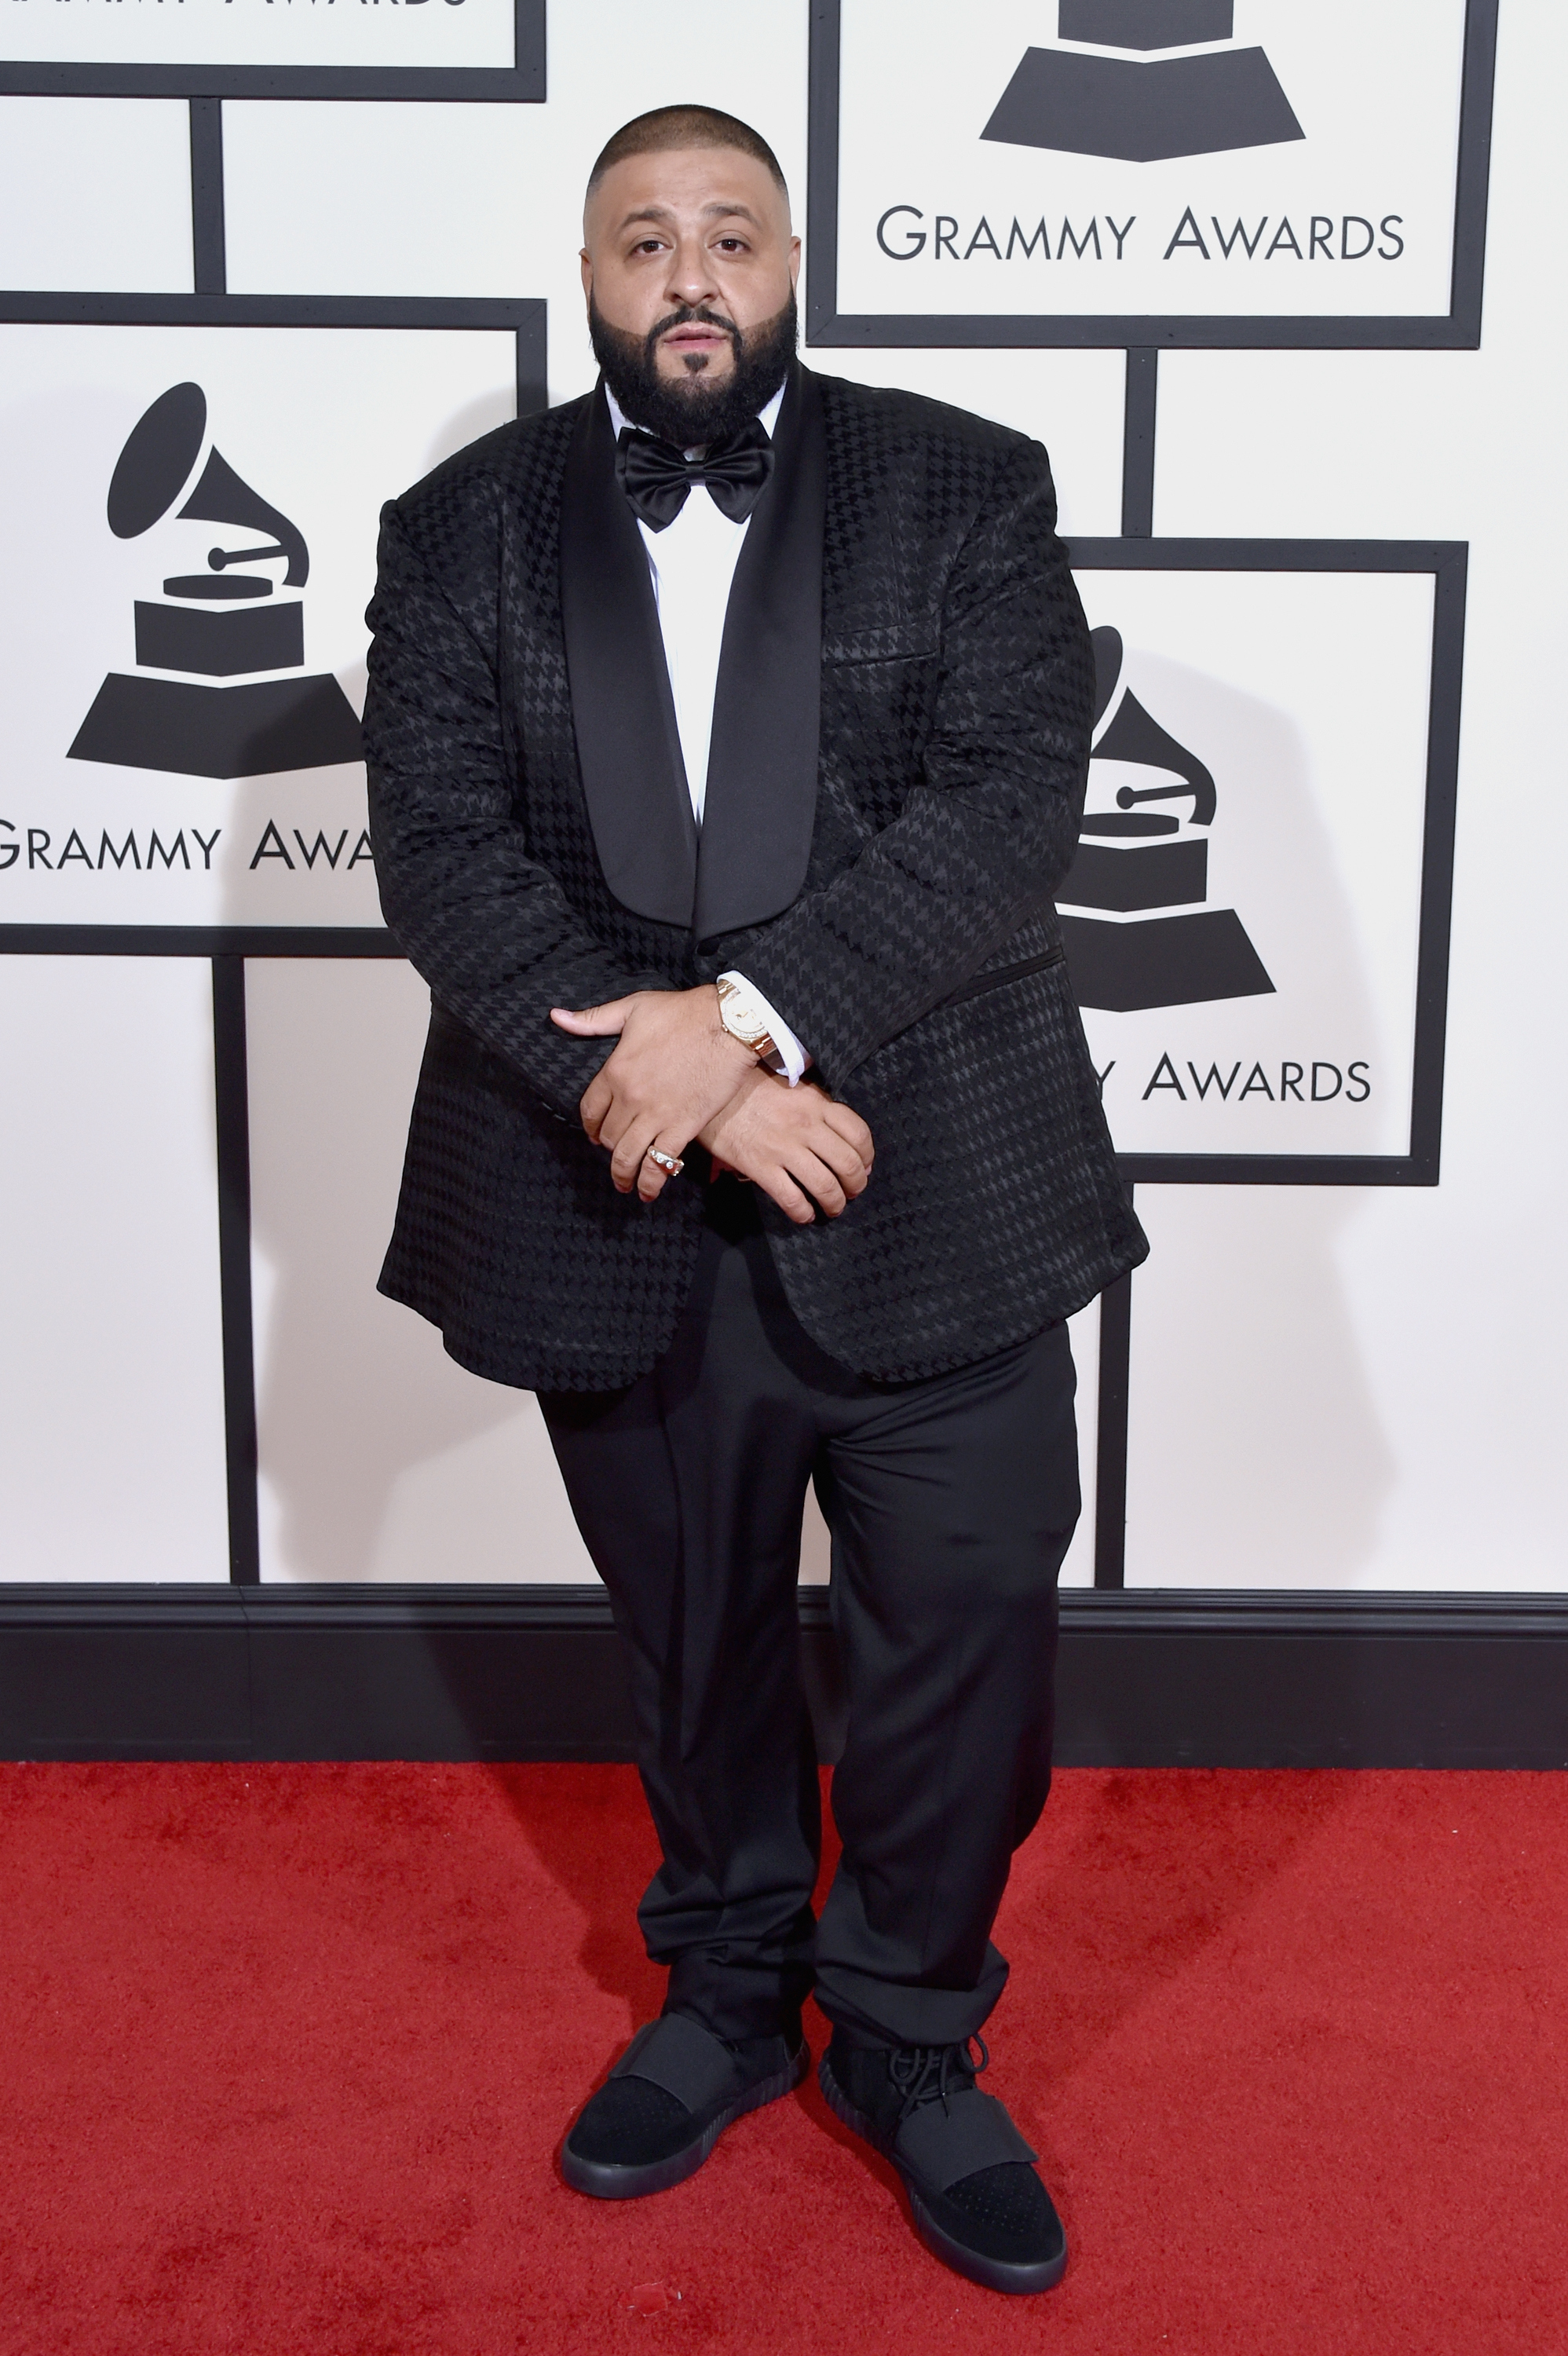 DJ Khaled attends the 58th GRAMMY Awards at Staples Center on Feb. 15, 2016 in Los Angeles.